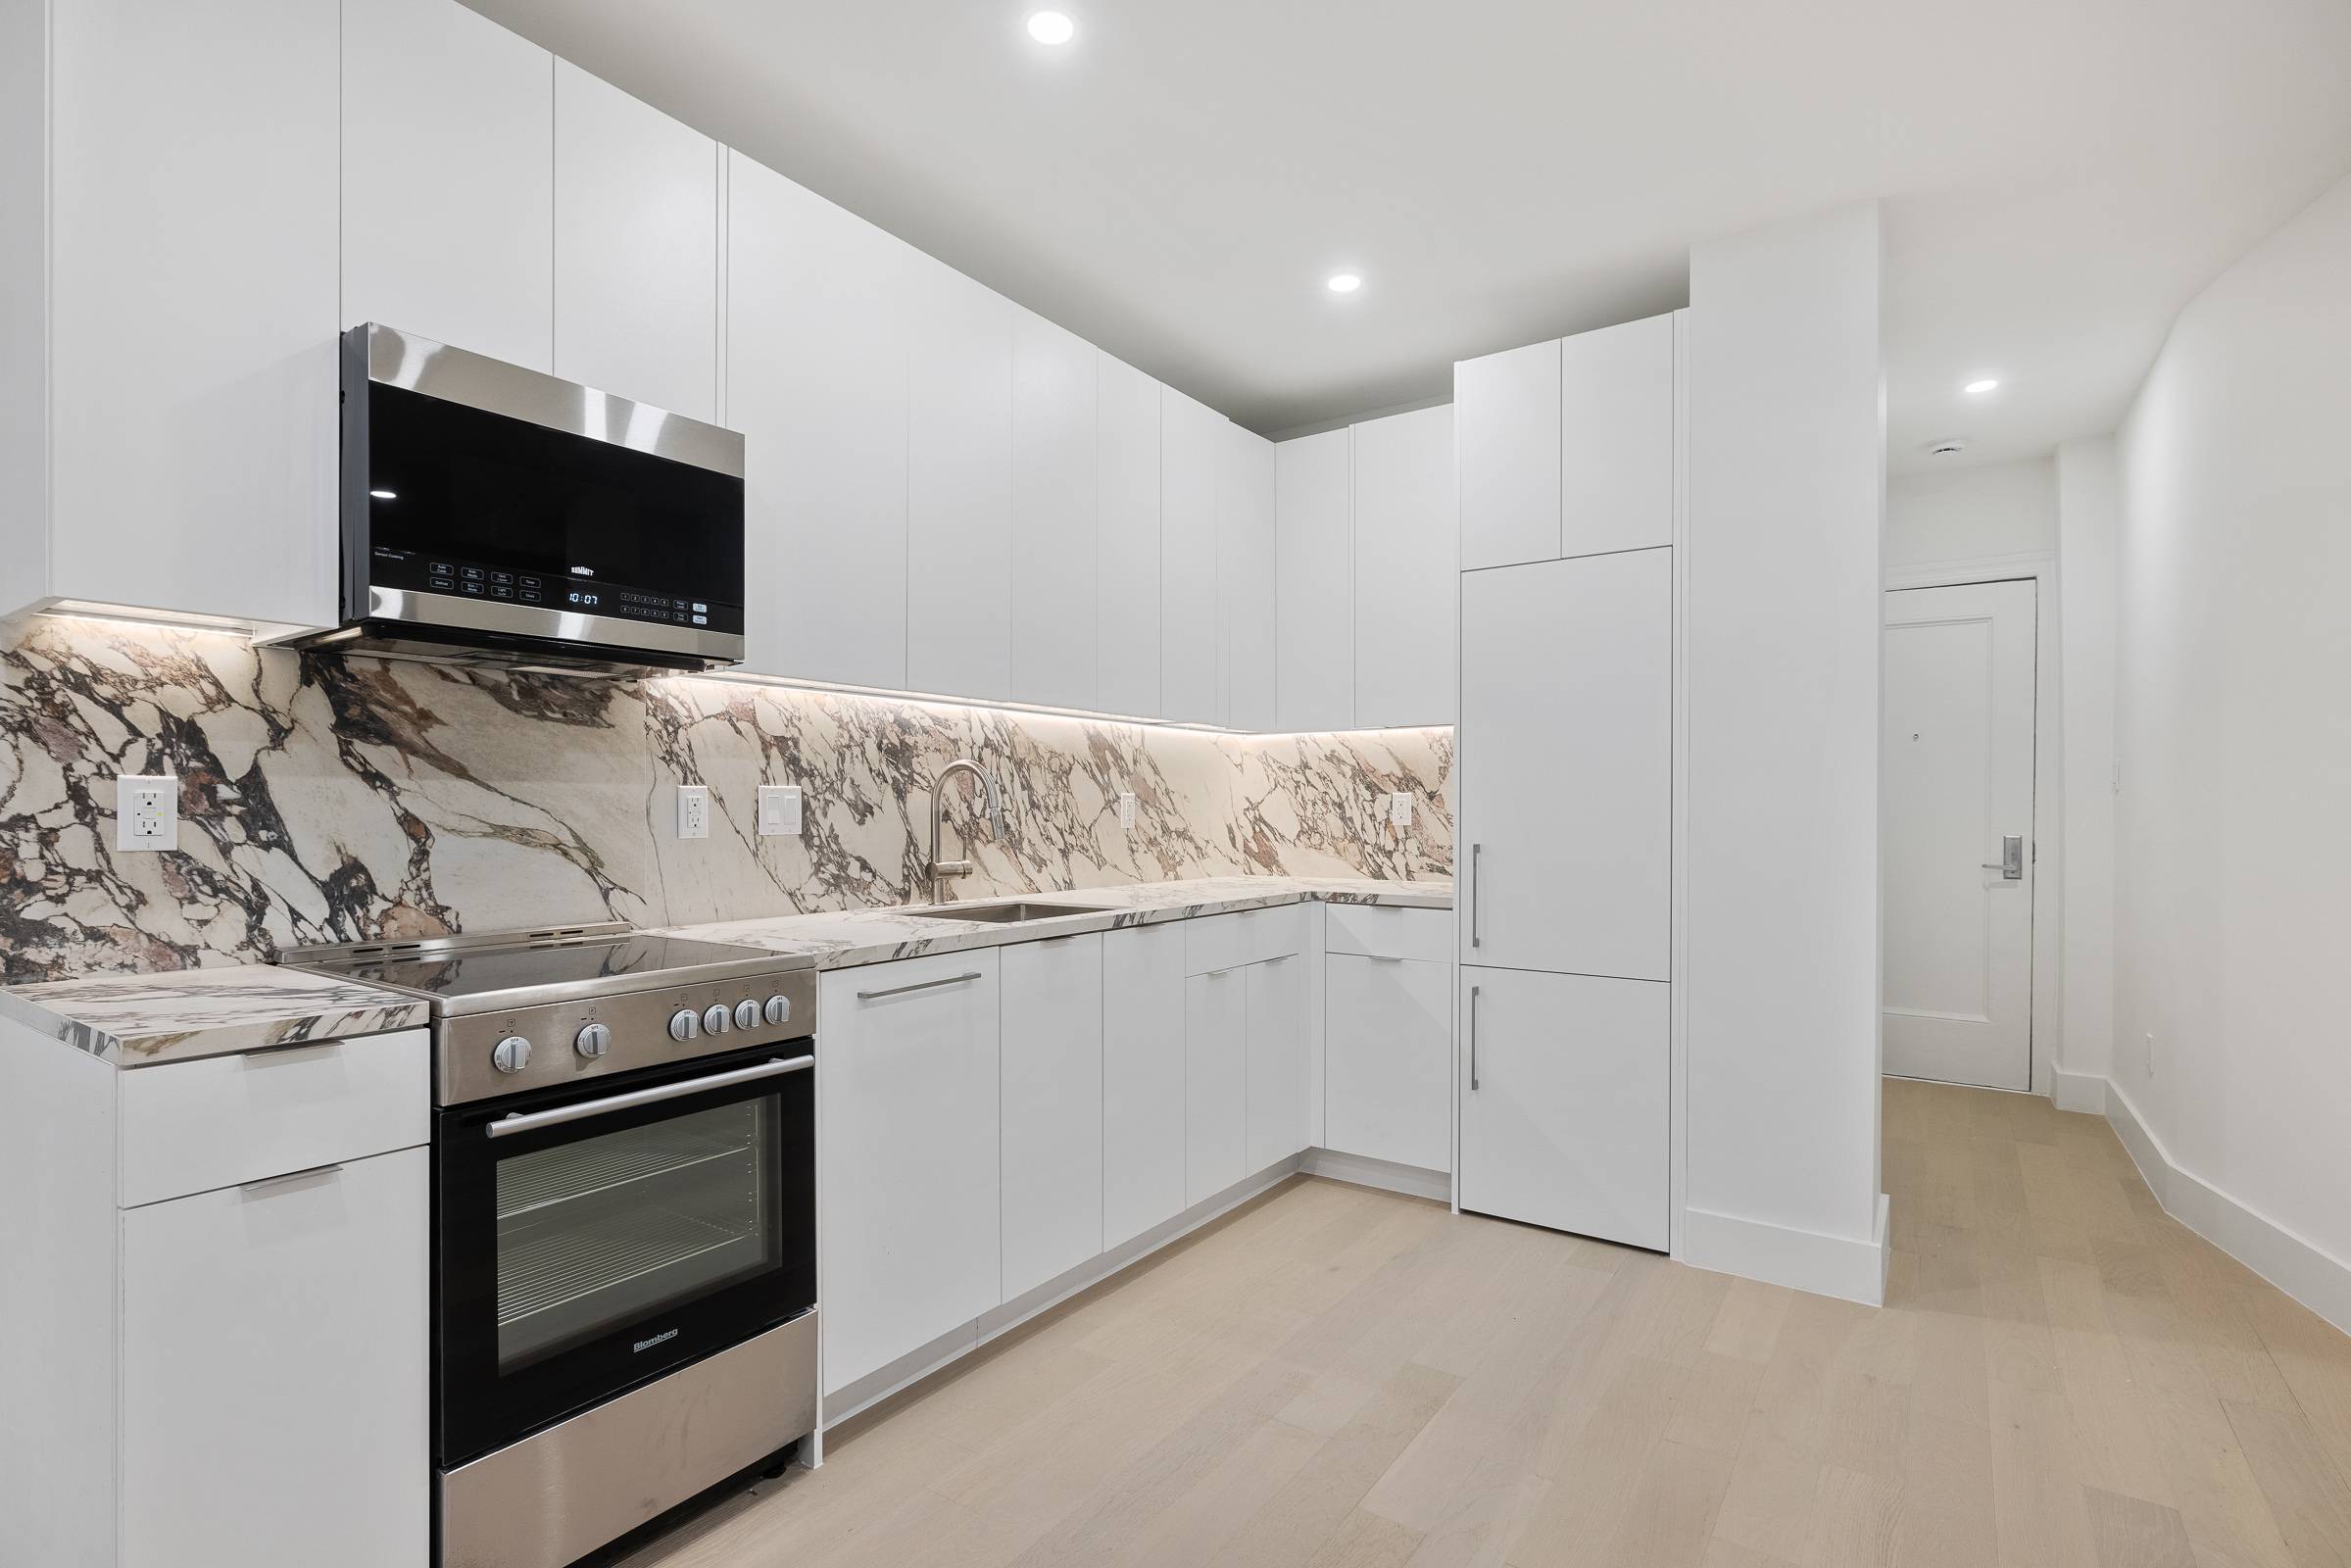 Beautifully gut renovated 1 bedroom, 1 bath residence featuring a stunning large kitchen with stainless steel appliances, wide plank Oak flooring, spacious bedrooms and in unit washer dryer.